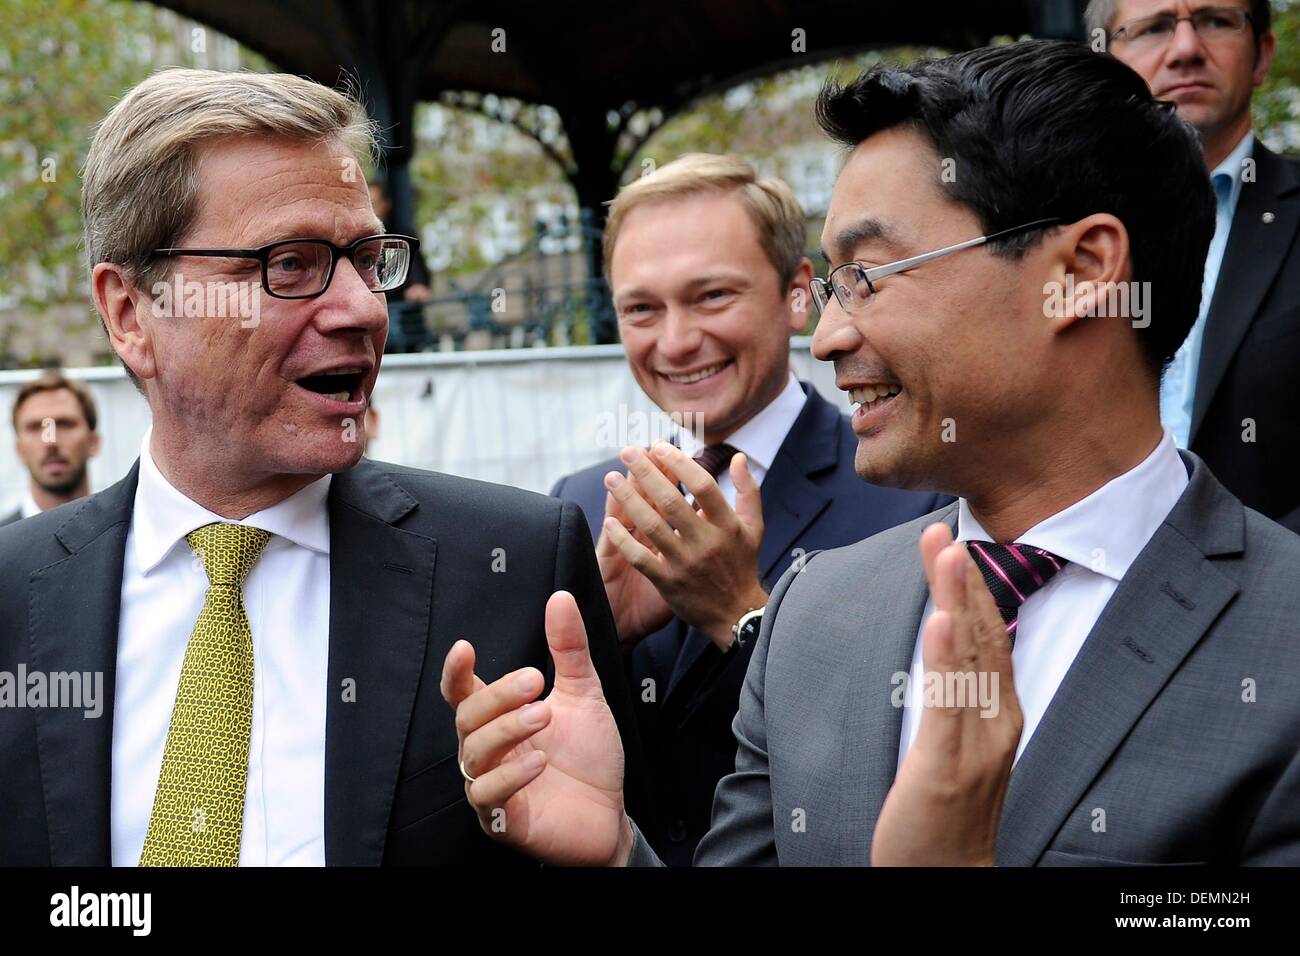 Duesseldorf, Germany. 21st Sep, 2013. Federal Foreign Minister Guido Westerwelle (L), chairman of North Rhine-Westphalia (C) Christian Lindner and Federal chairman Philipp Roesler (R), all members of the Free Democratic Party (FDP) stand together at the nationwide closing rally of the FDP in Duesseldorf, Germany, 21 September 2013. Photo: MARIUS BECKER/dpa/Alamy Live News Stock Photo